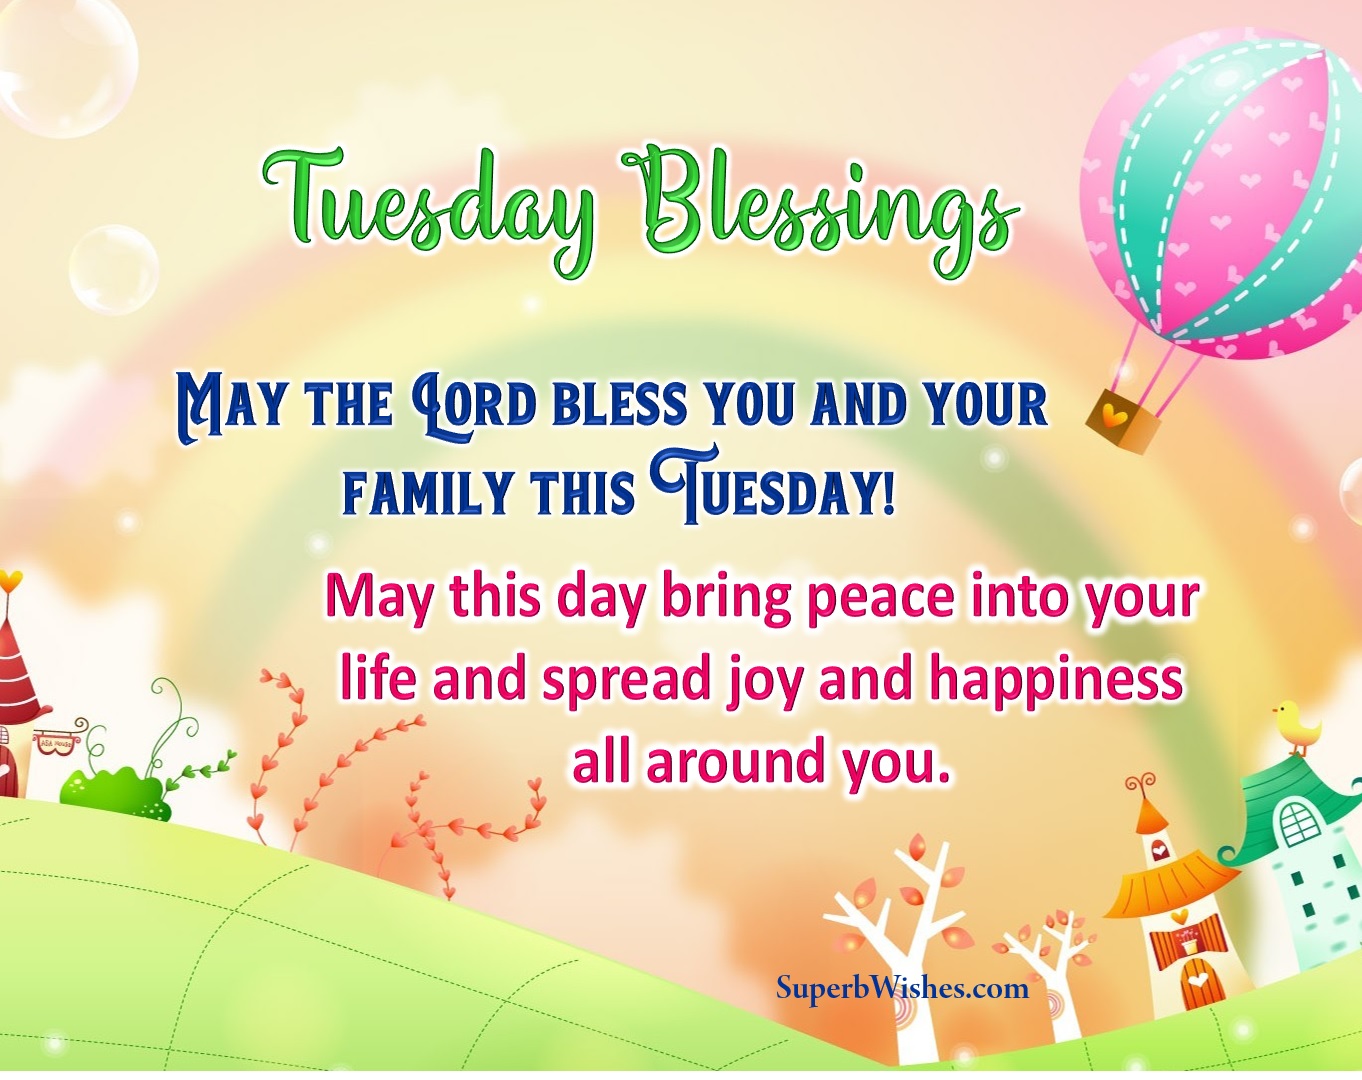 Tuesday blessings. Superbwishes.com